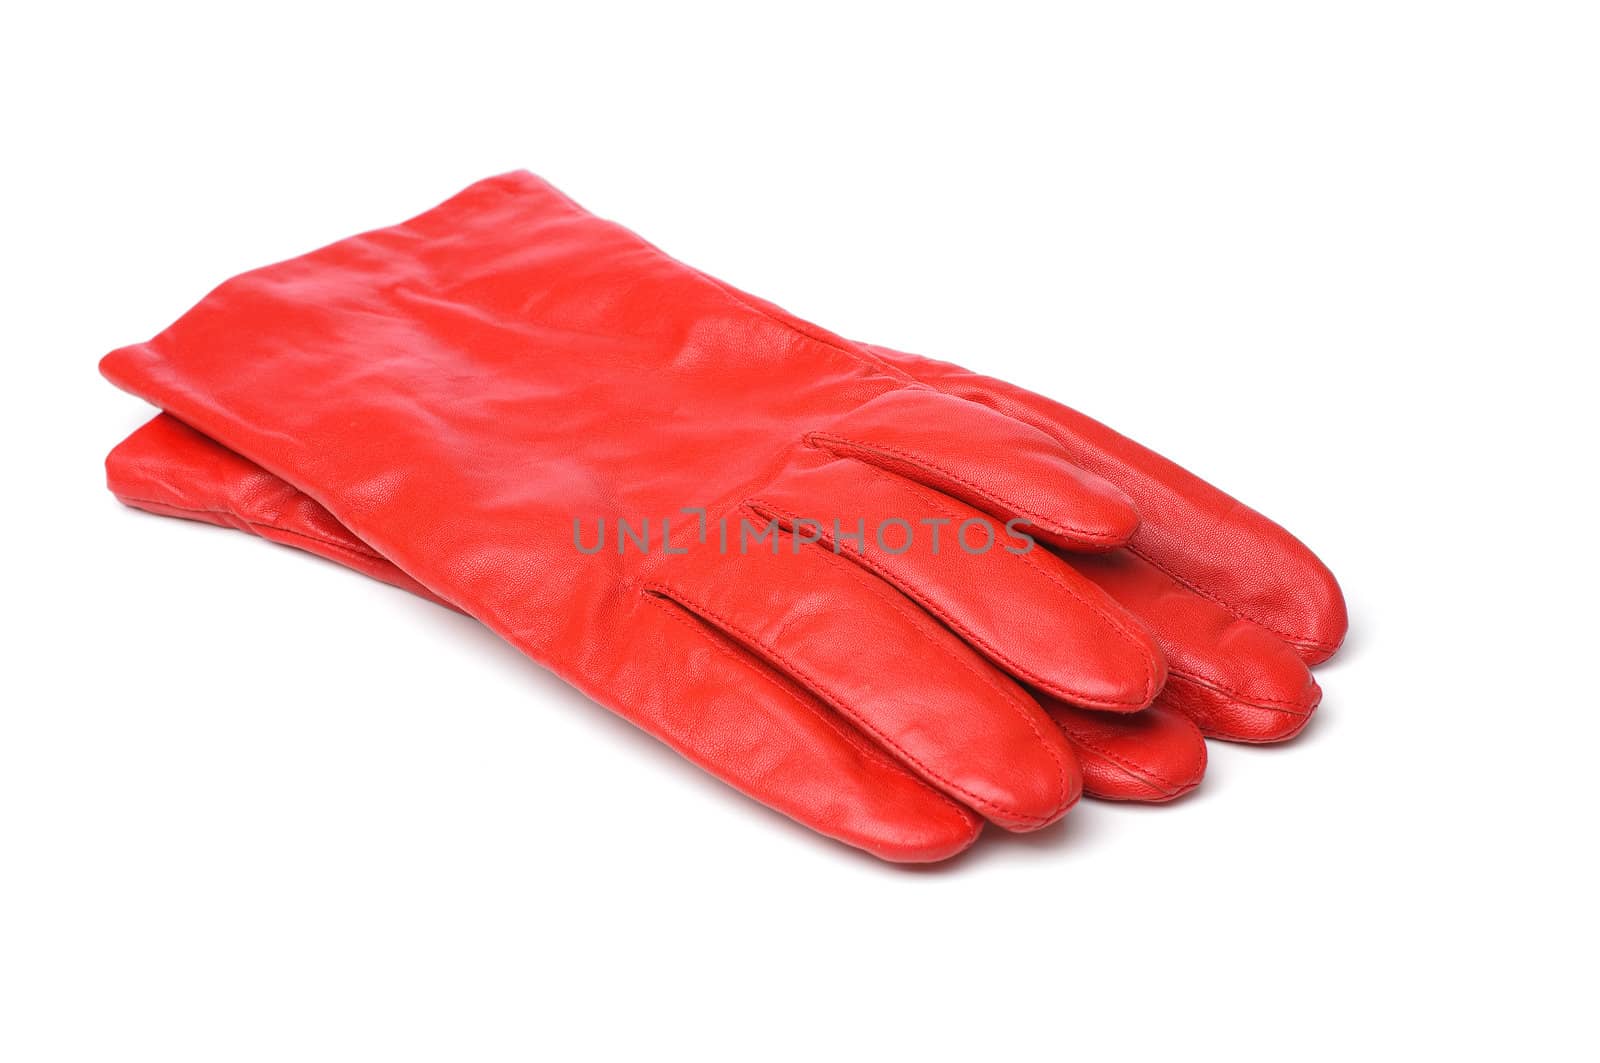 A pair of red leather gloves on white background.